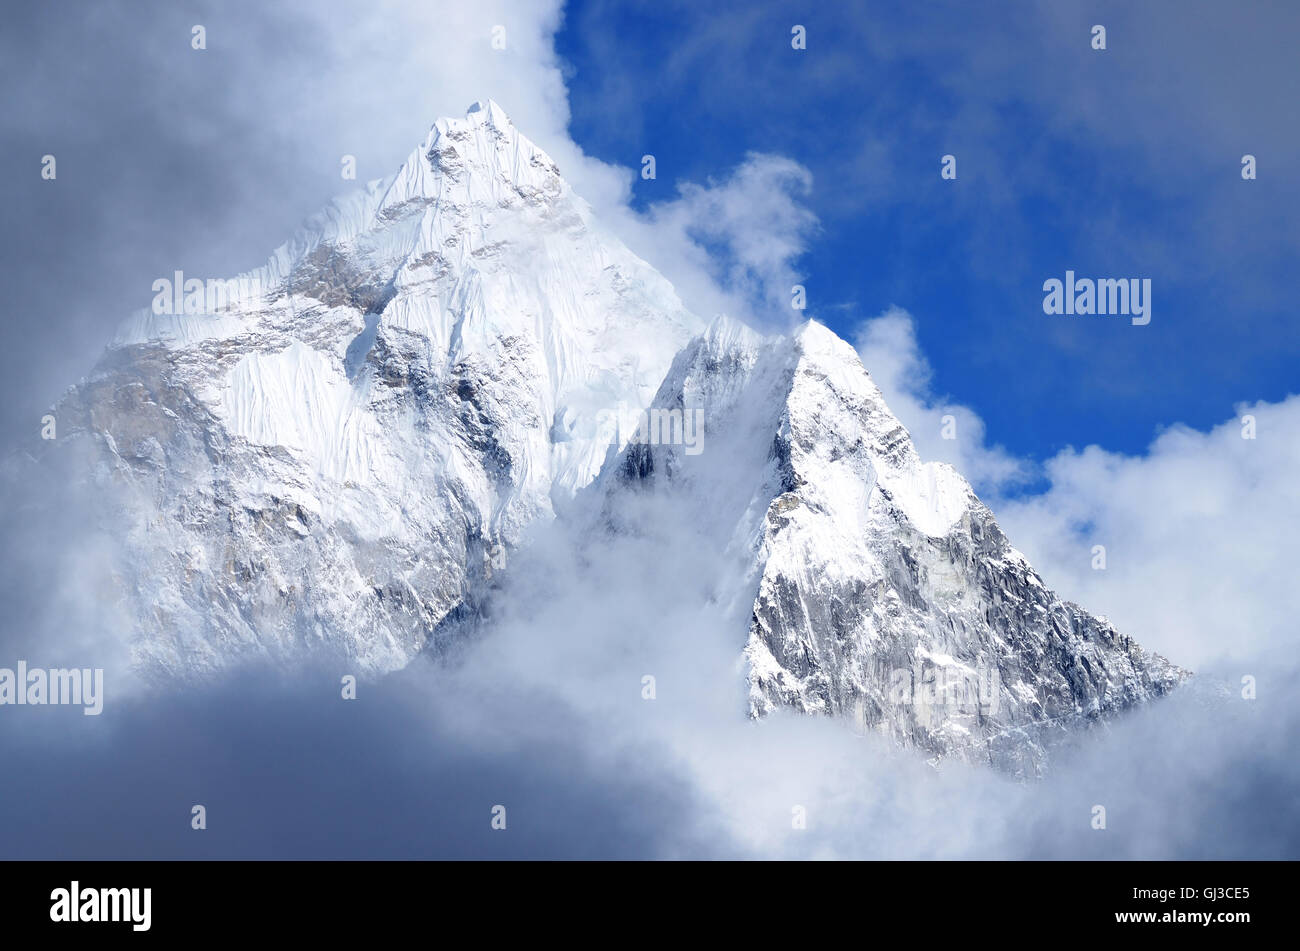 Himalayan peaks in clouds,Nepal, Everest region, Asia Stock Photo